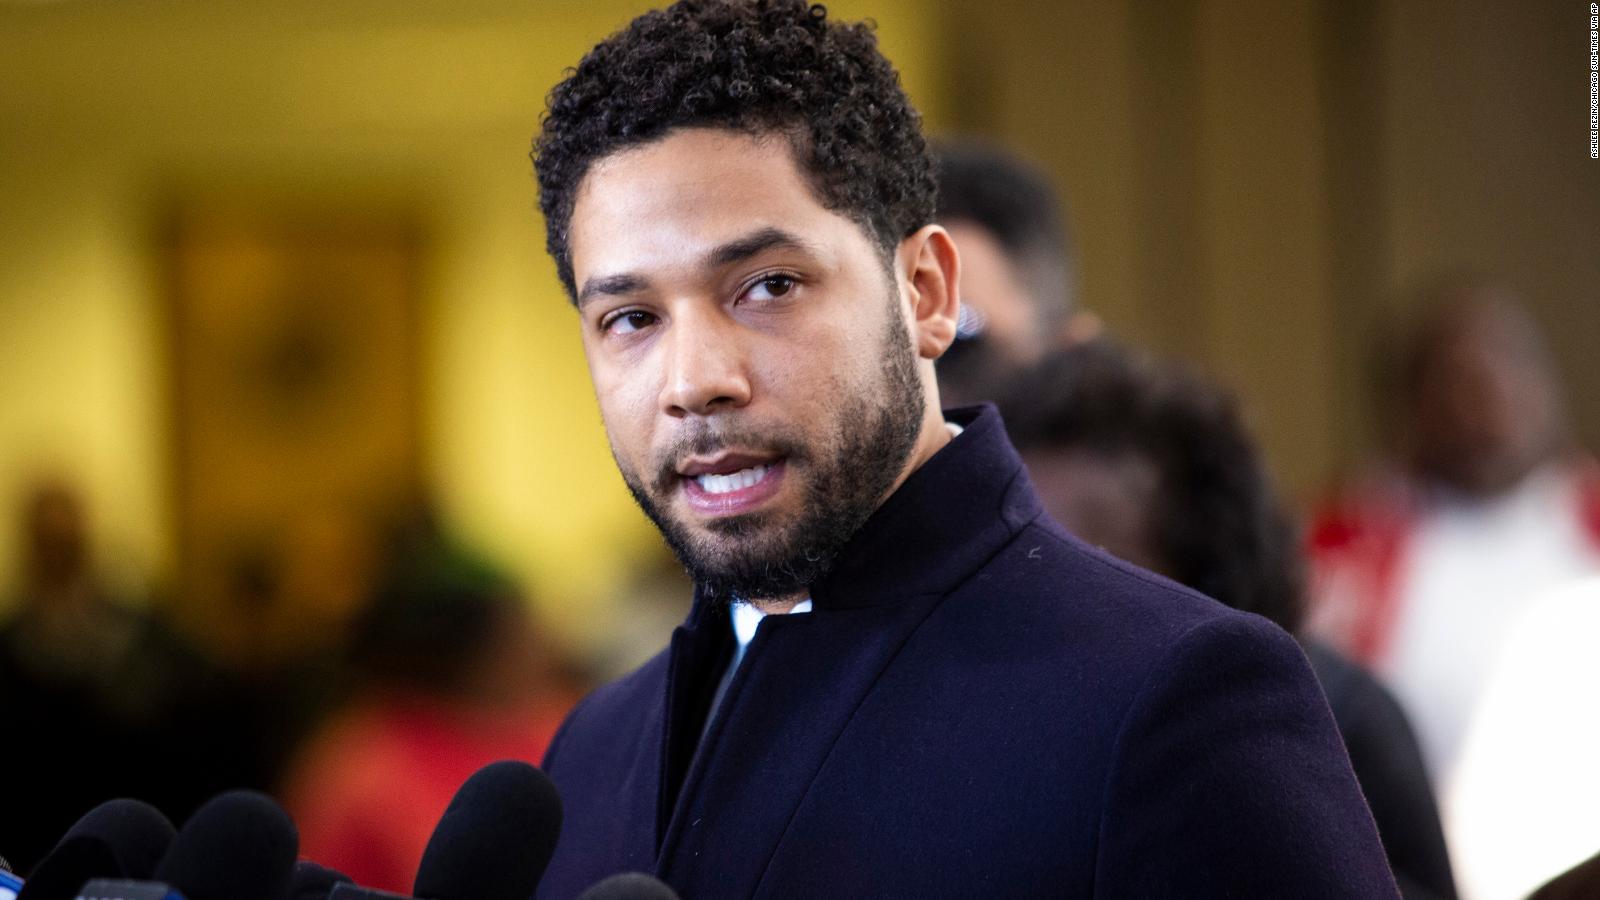 Jussie Smollett, convicted of lying to the police